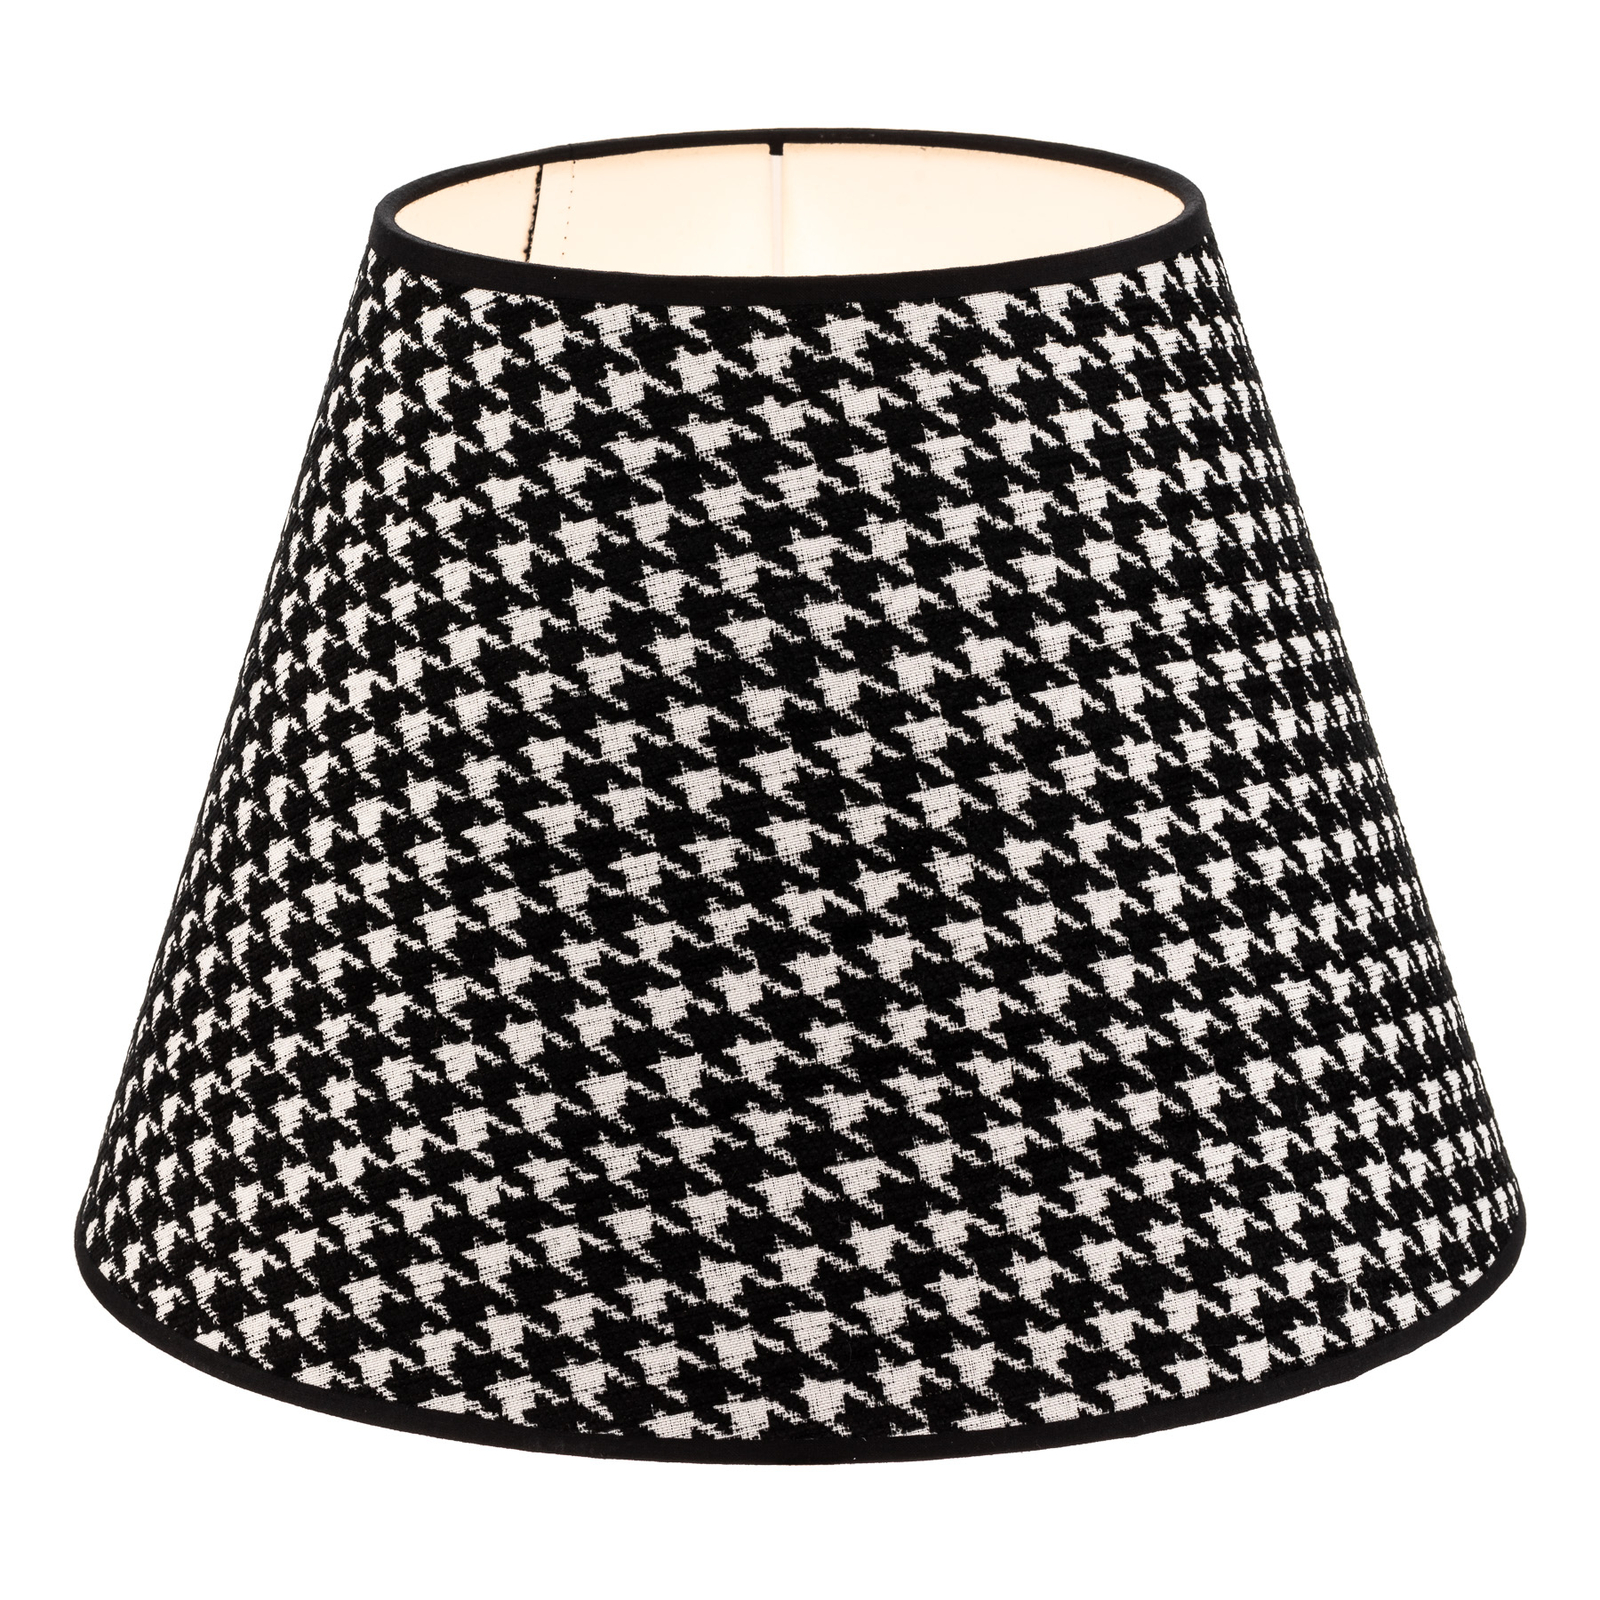 Sofia lampshade 26cm, houndstooth pattern black